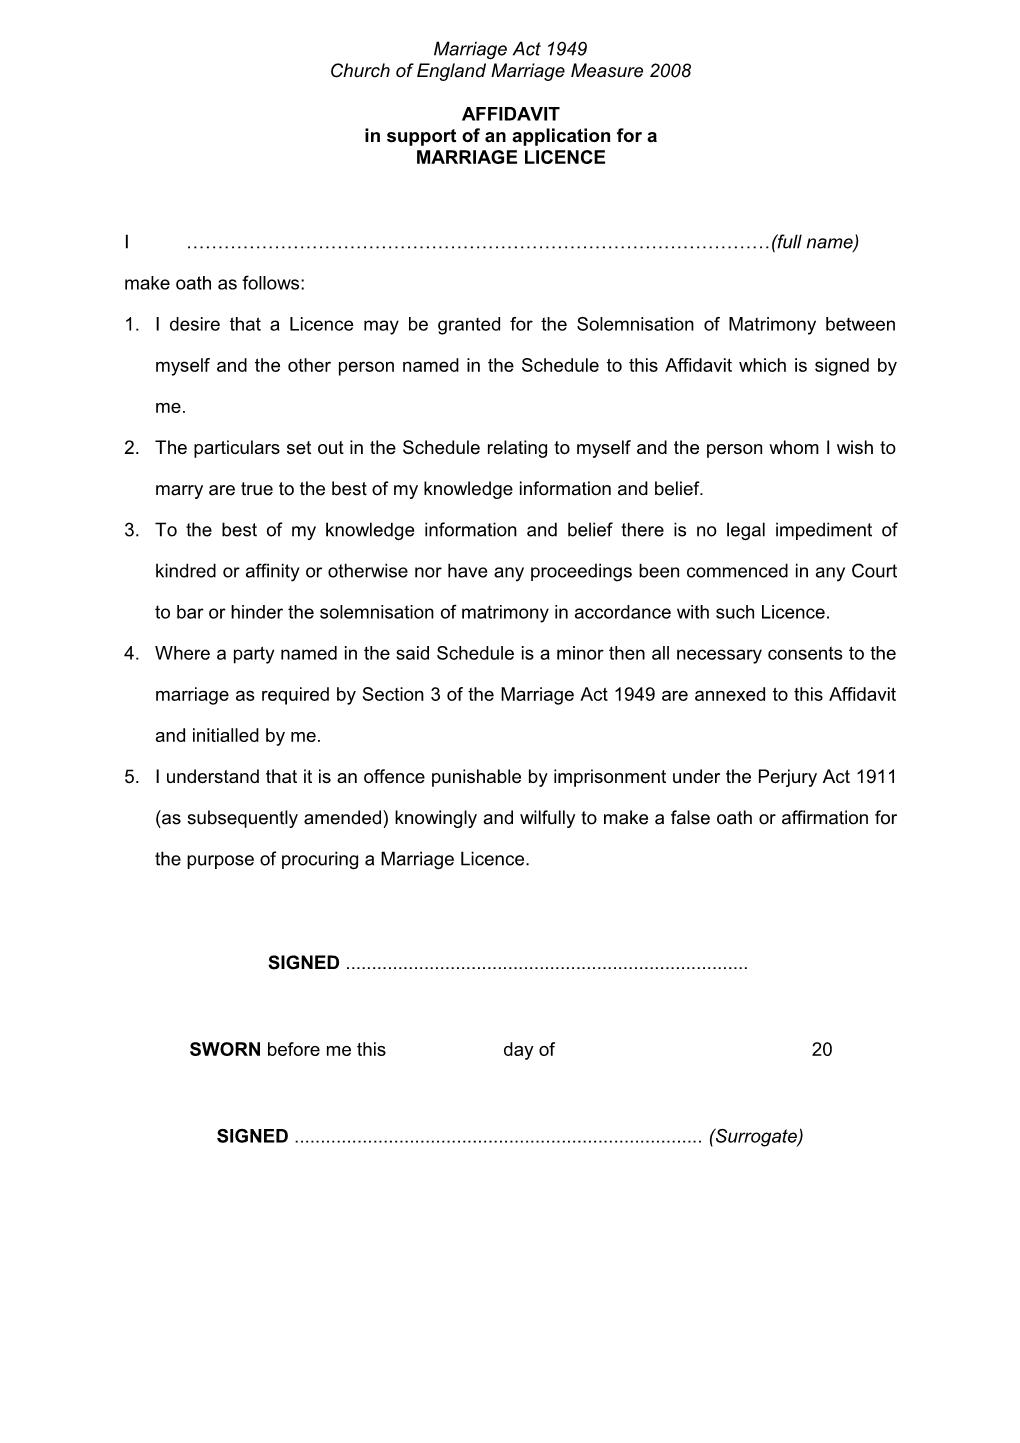 Church of England Marriage Measure 2008